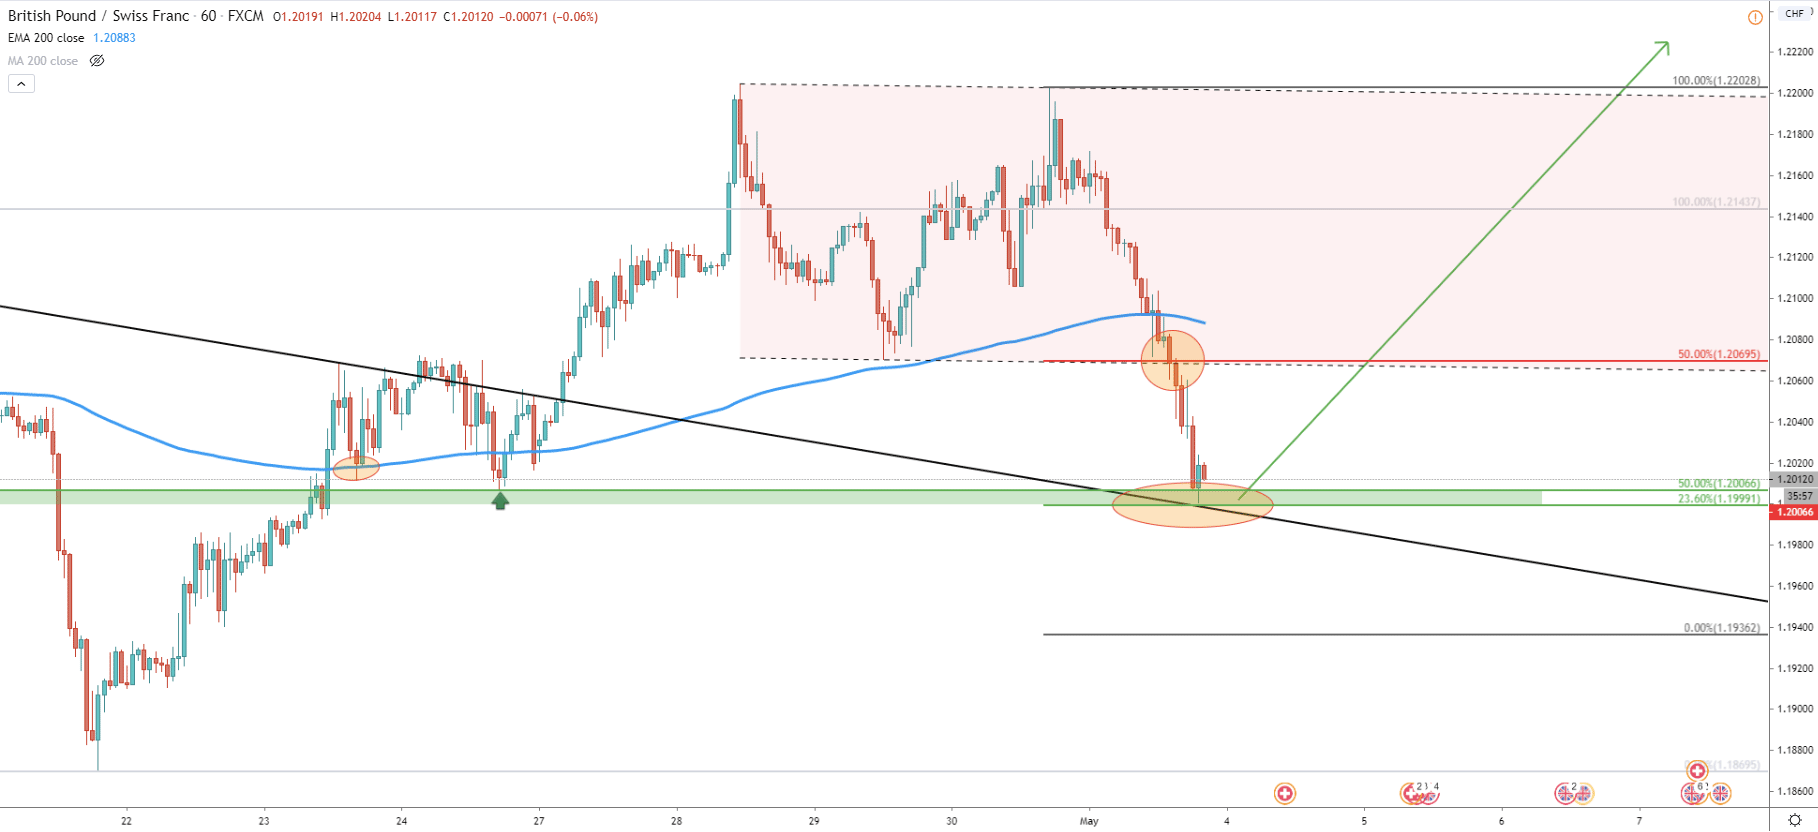 GBP/CHF 1-Hour Technical Analysis 1 May 2020